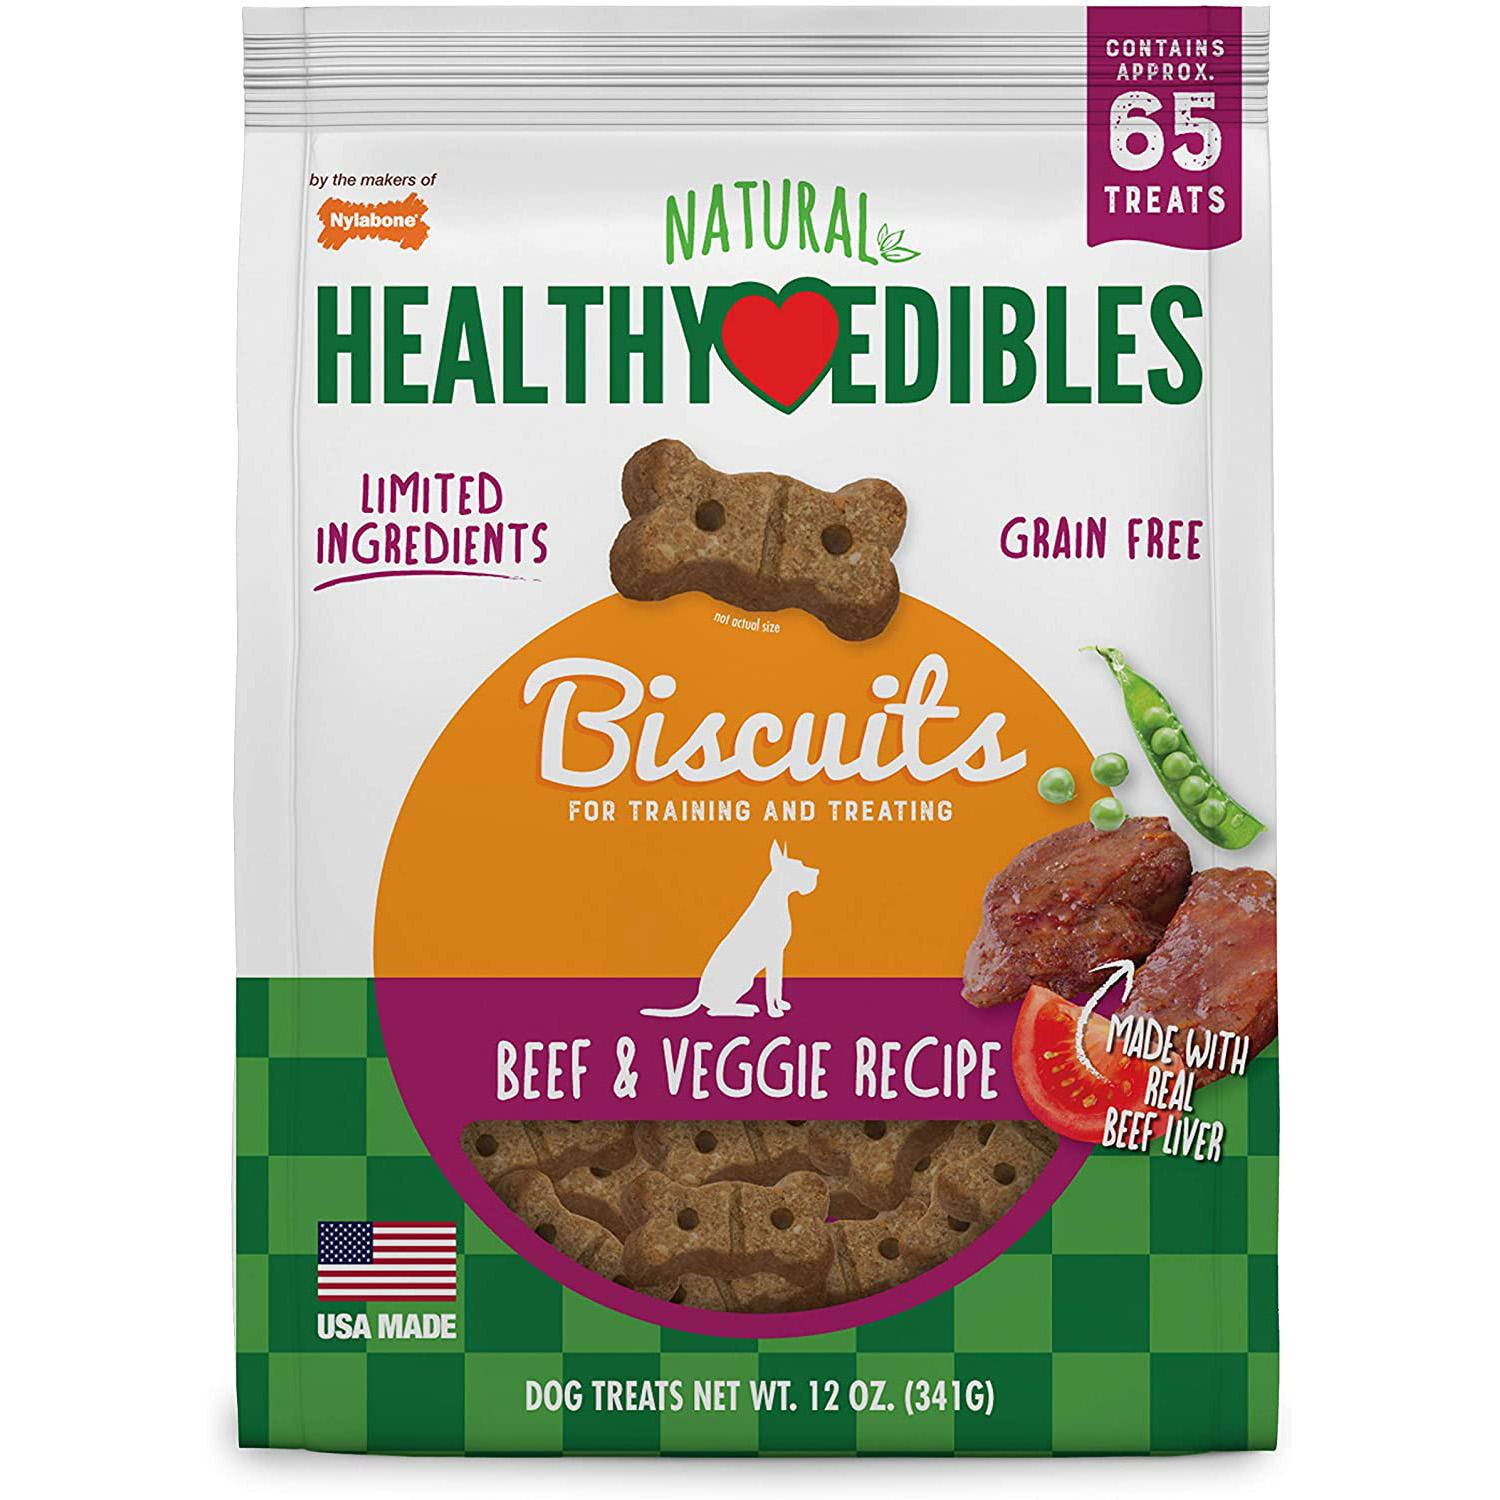 Nylabone Healthy Edibles Biscuits Dog Treats for $4.06 Shipped